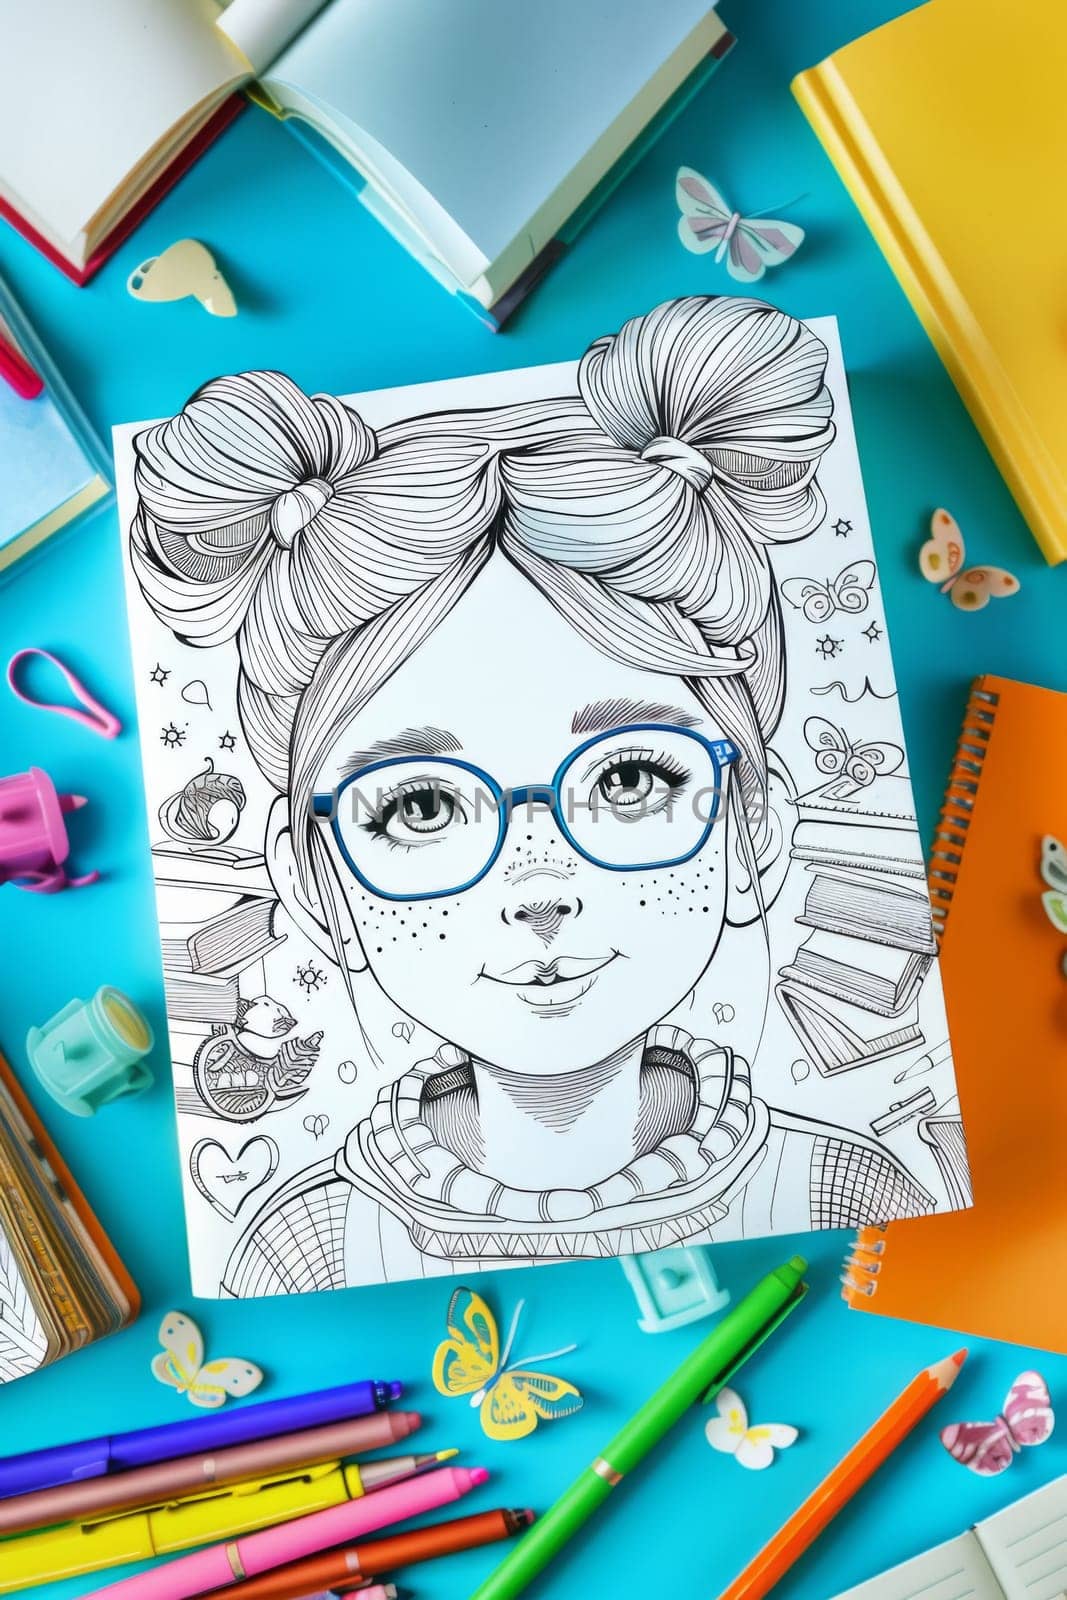 A drawing of a girl with glasses and hair sitting on top of school supplies